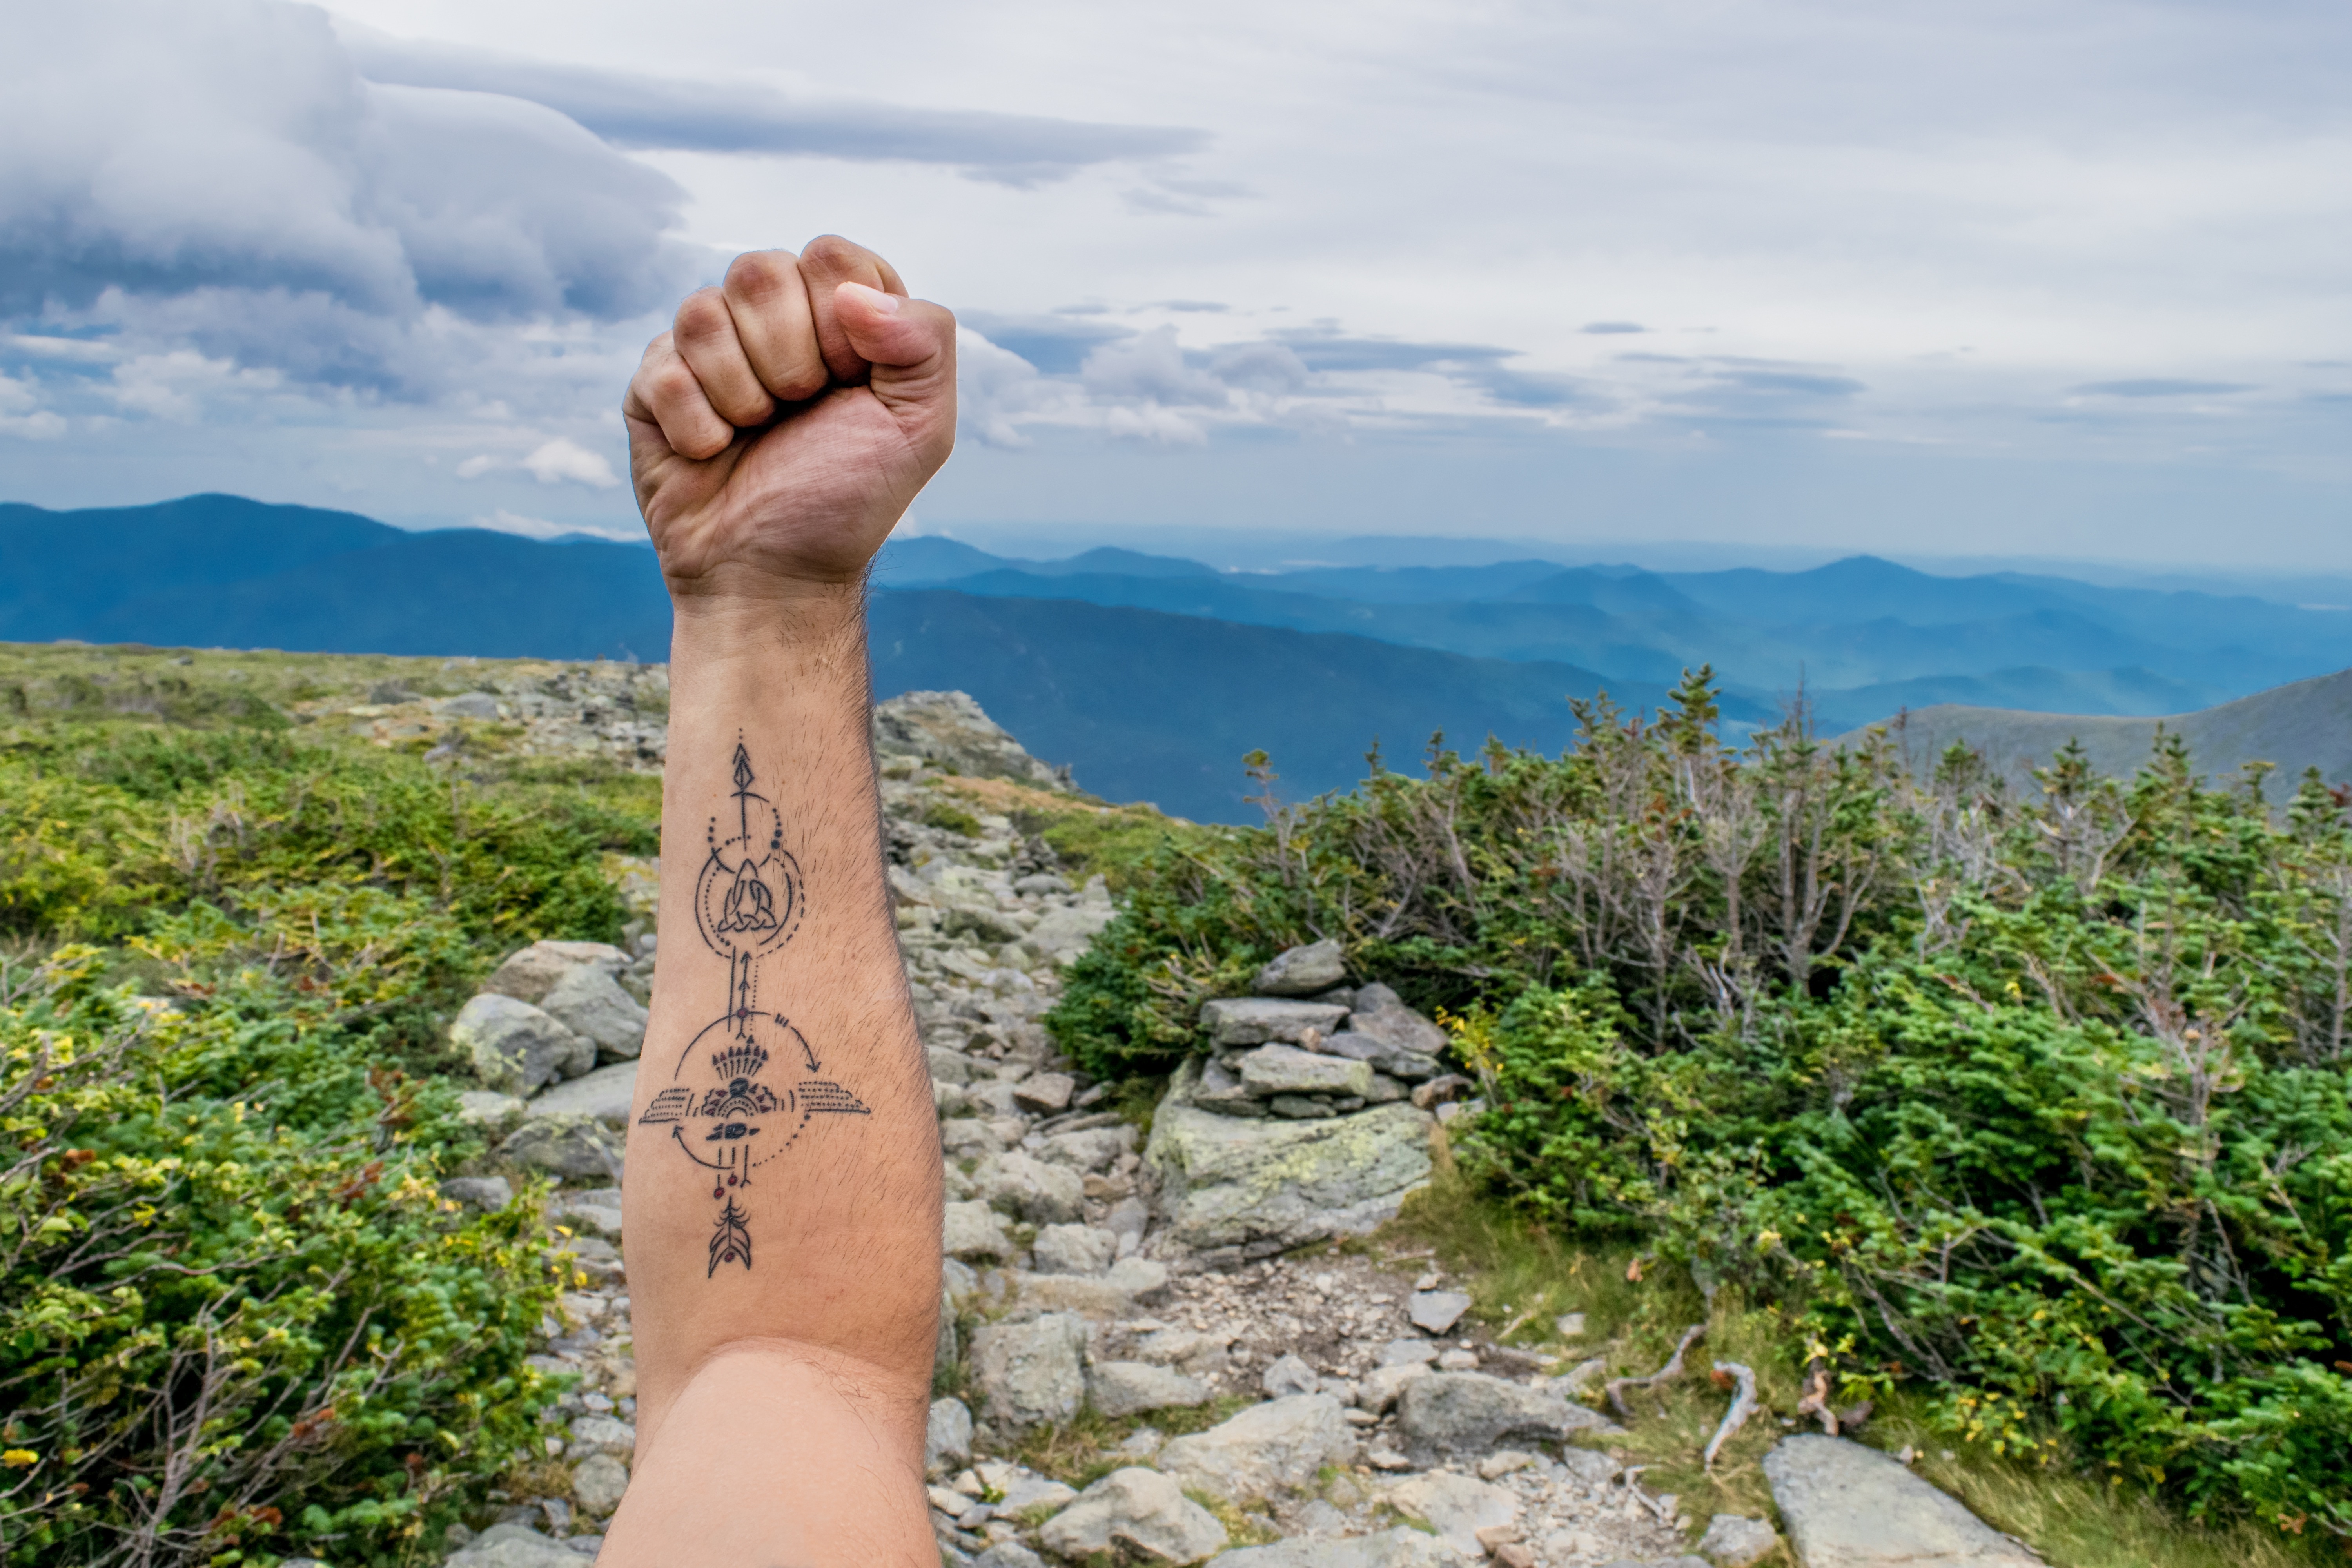 human right arm with tattoo near plant and mountains at daytime